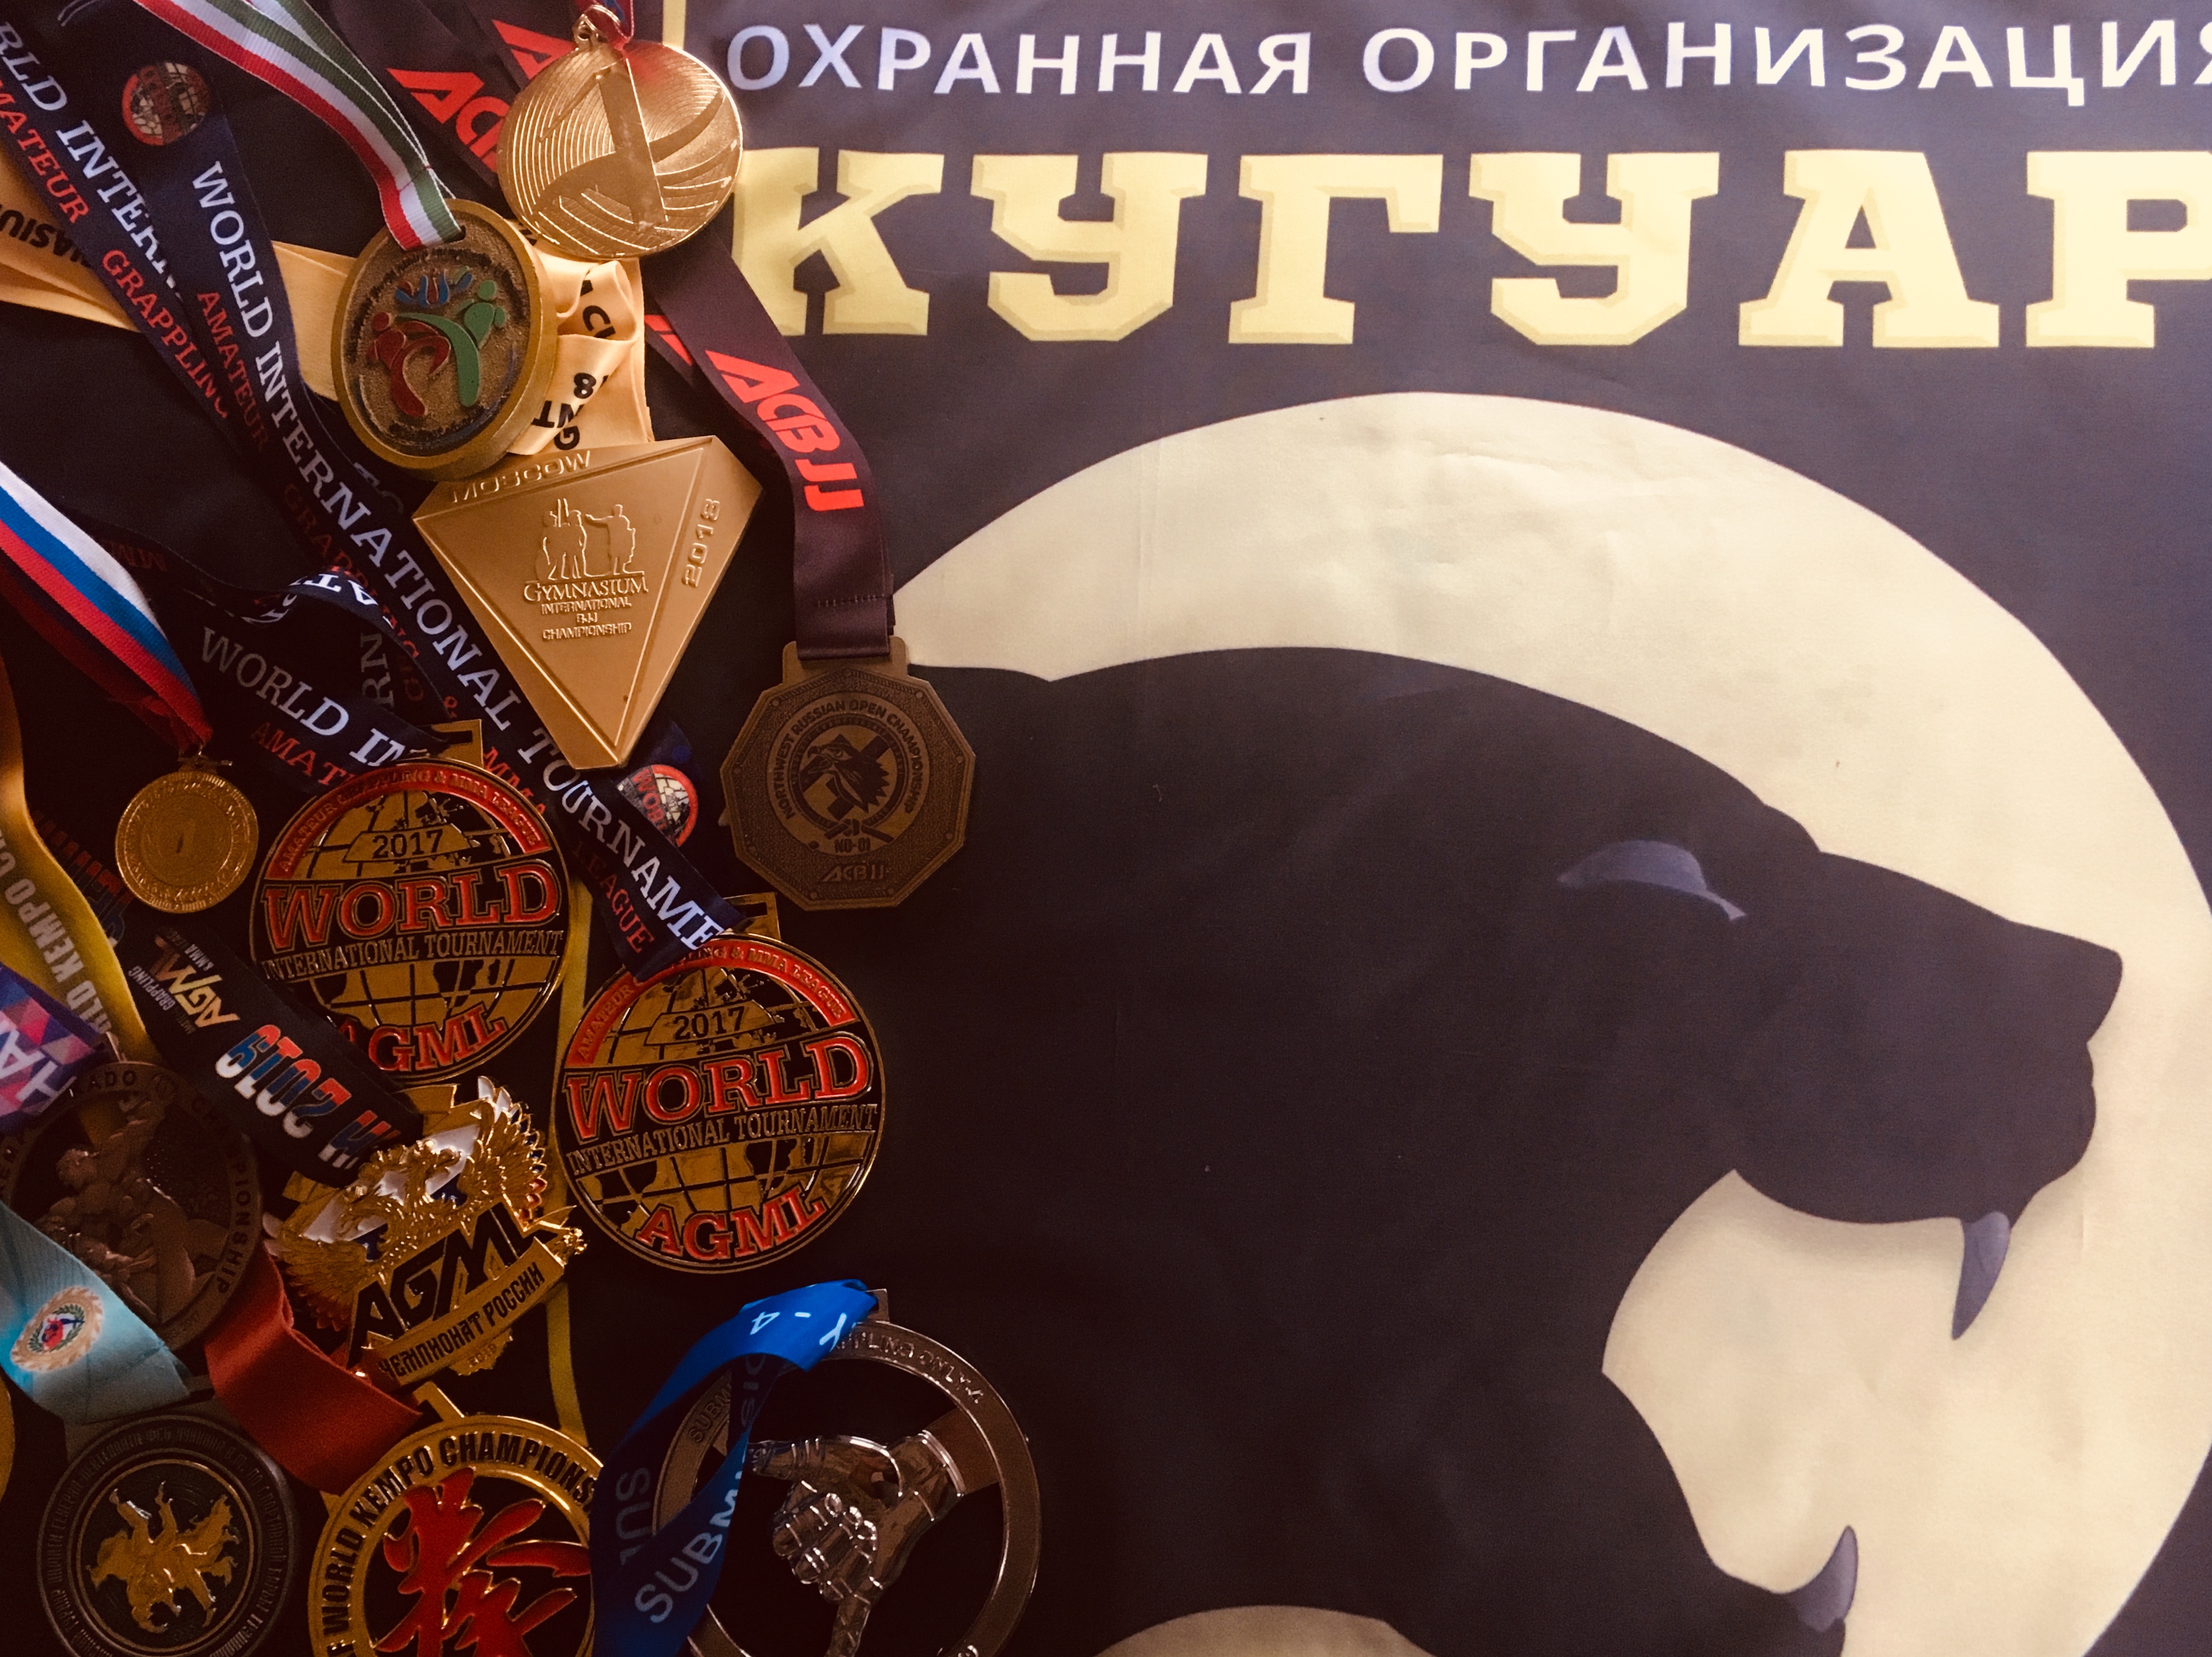 July 31 - August 5, 2019, Russian Championship in wrestling, Oryol 